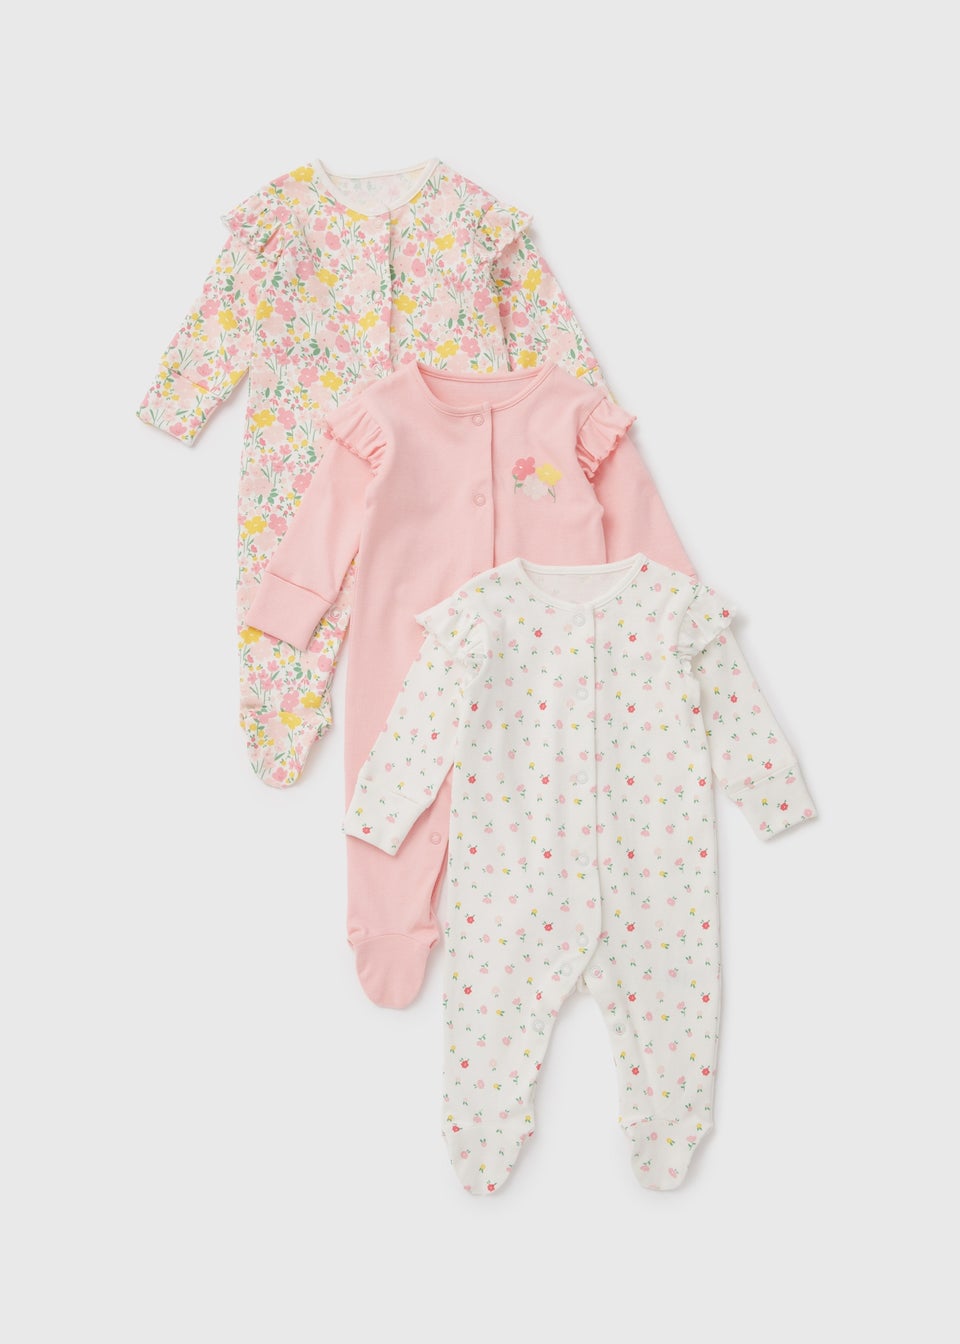 Baby 3 Pack Pink Floral Print Sleepsuits (Tiny Baby-18mths)